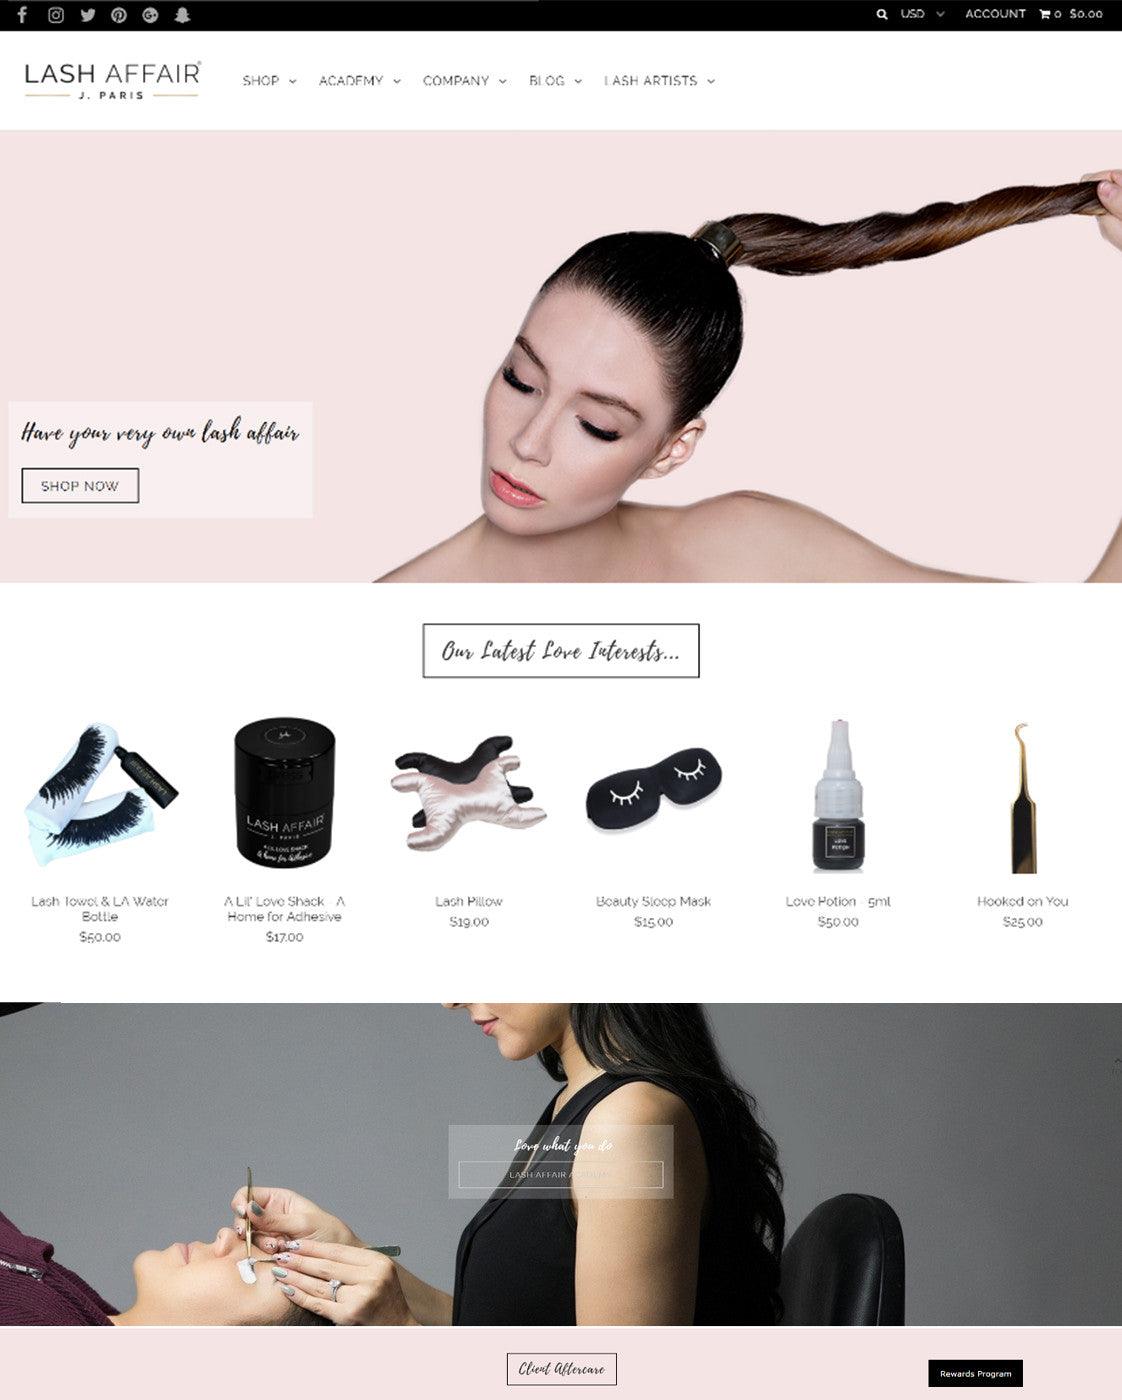 Lash Affair - Photography and Web Design - Los Angeles, US based Shopify Experts Revo Designs